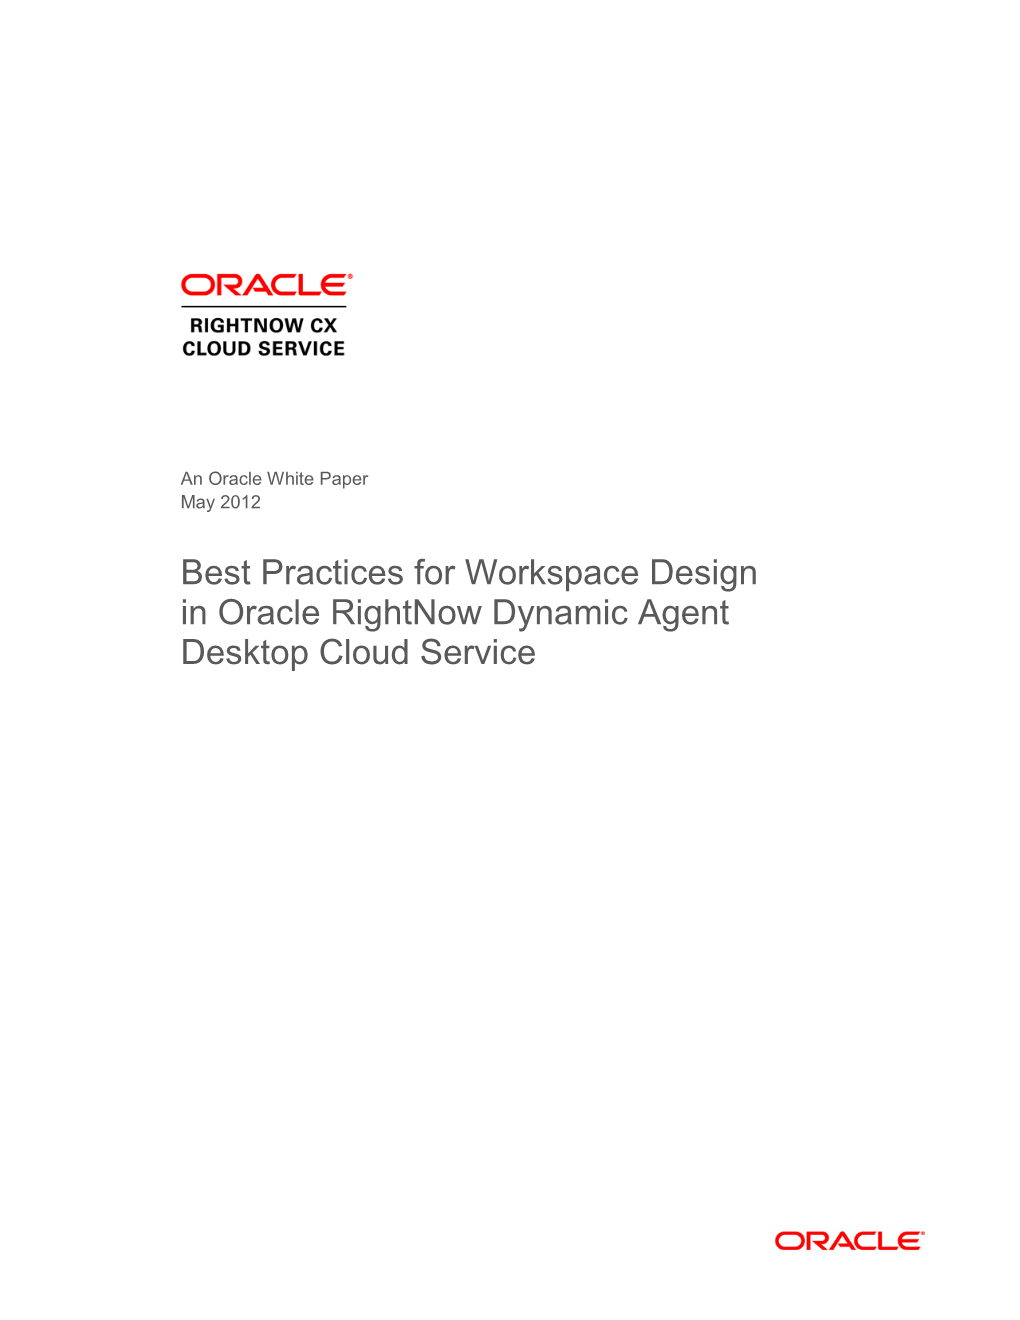 Best Practices for Workspace Design in Oracle Rightnow Dynamic Agent Desktop Cloud Service